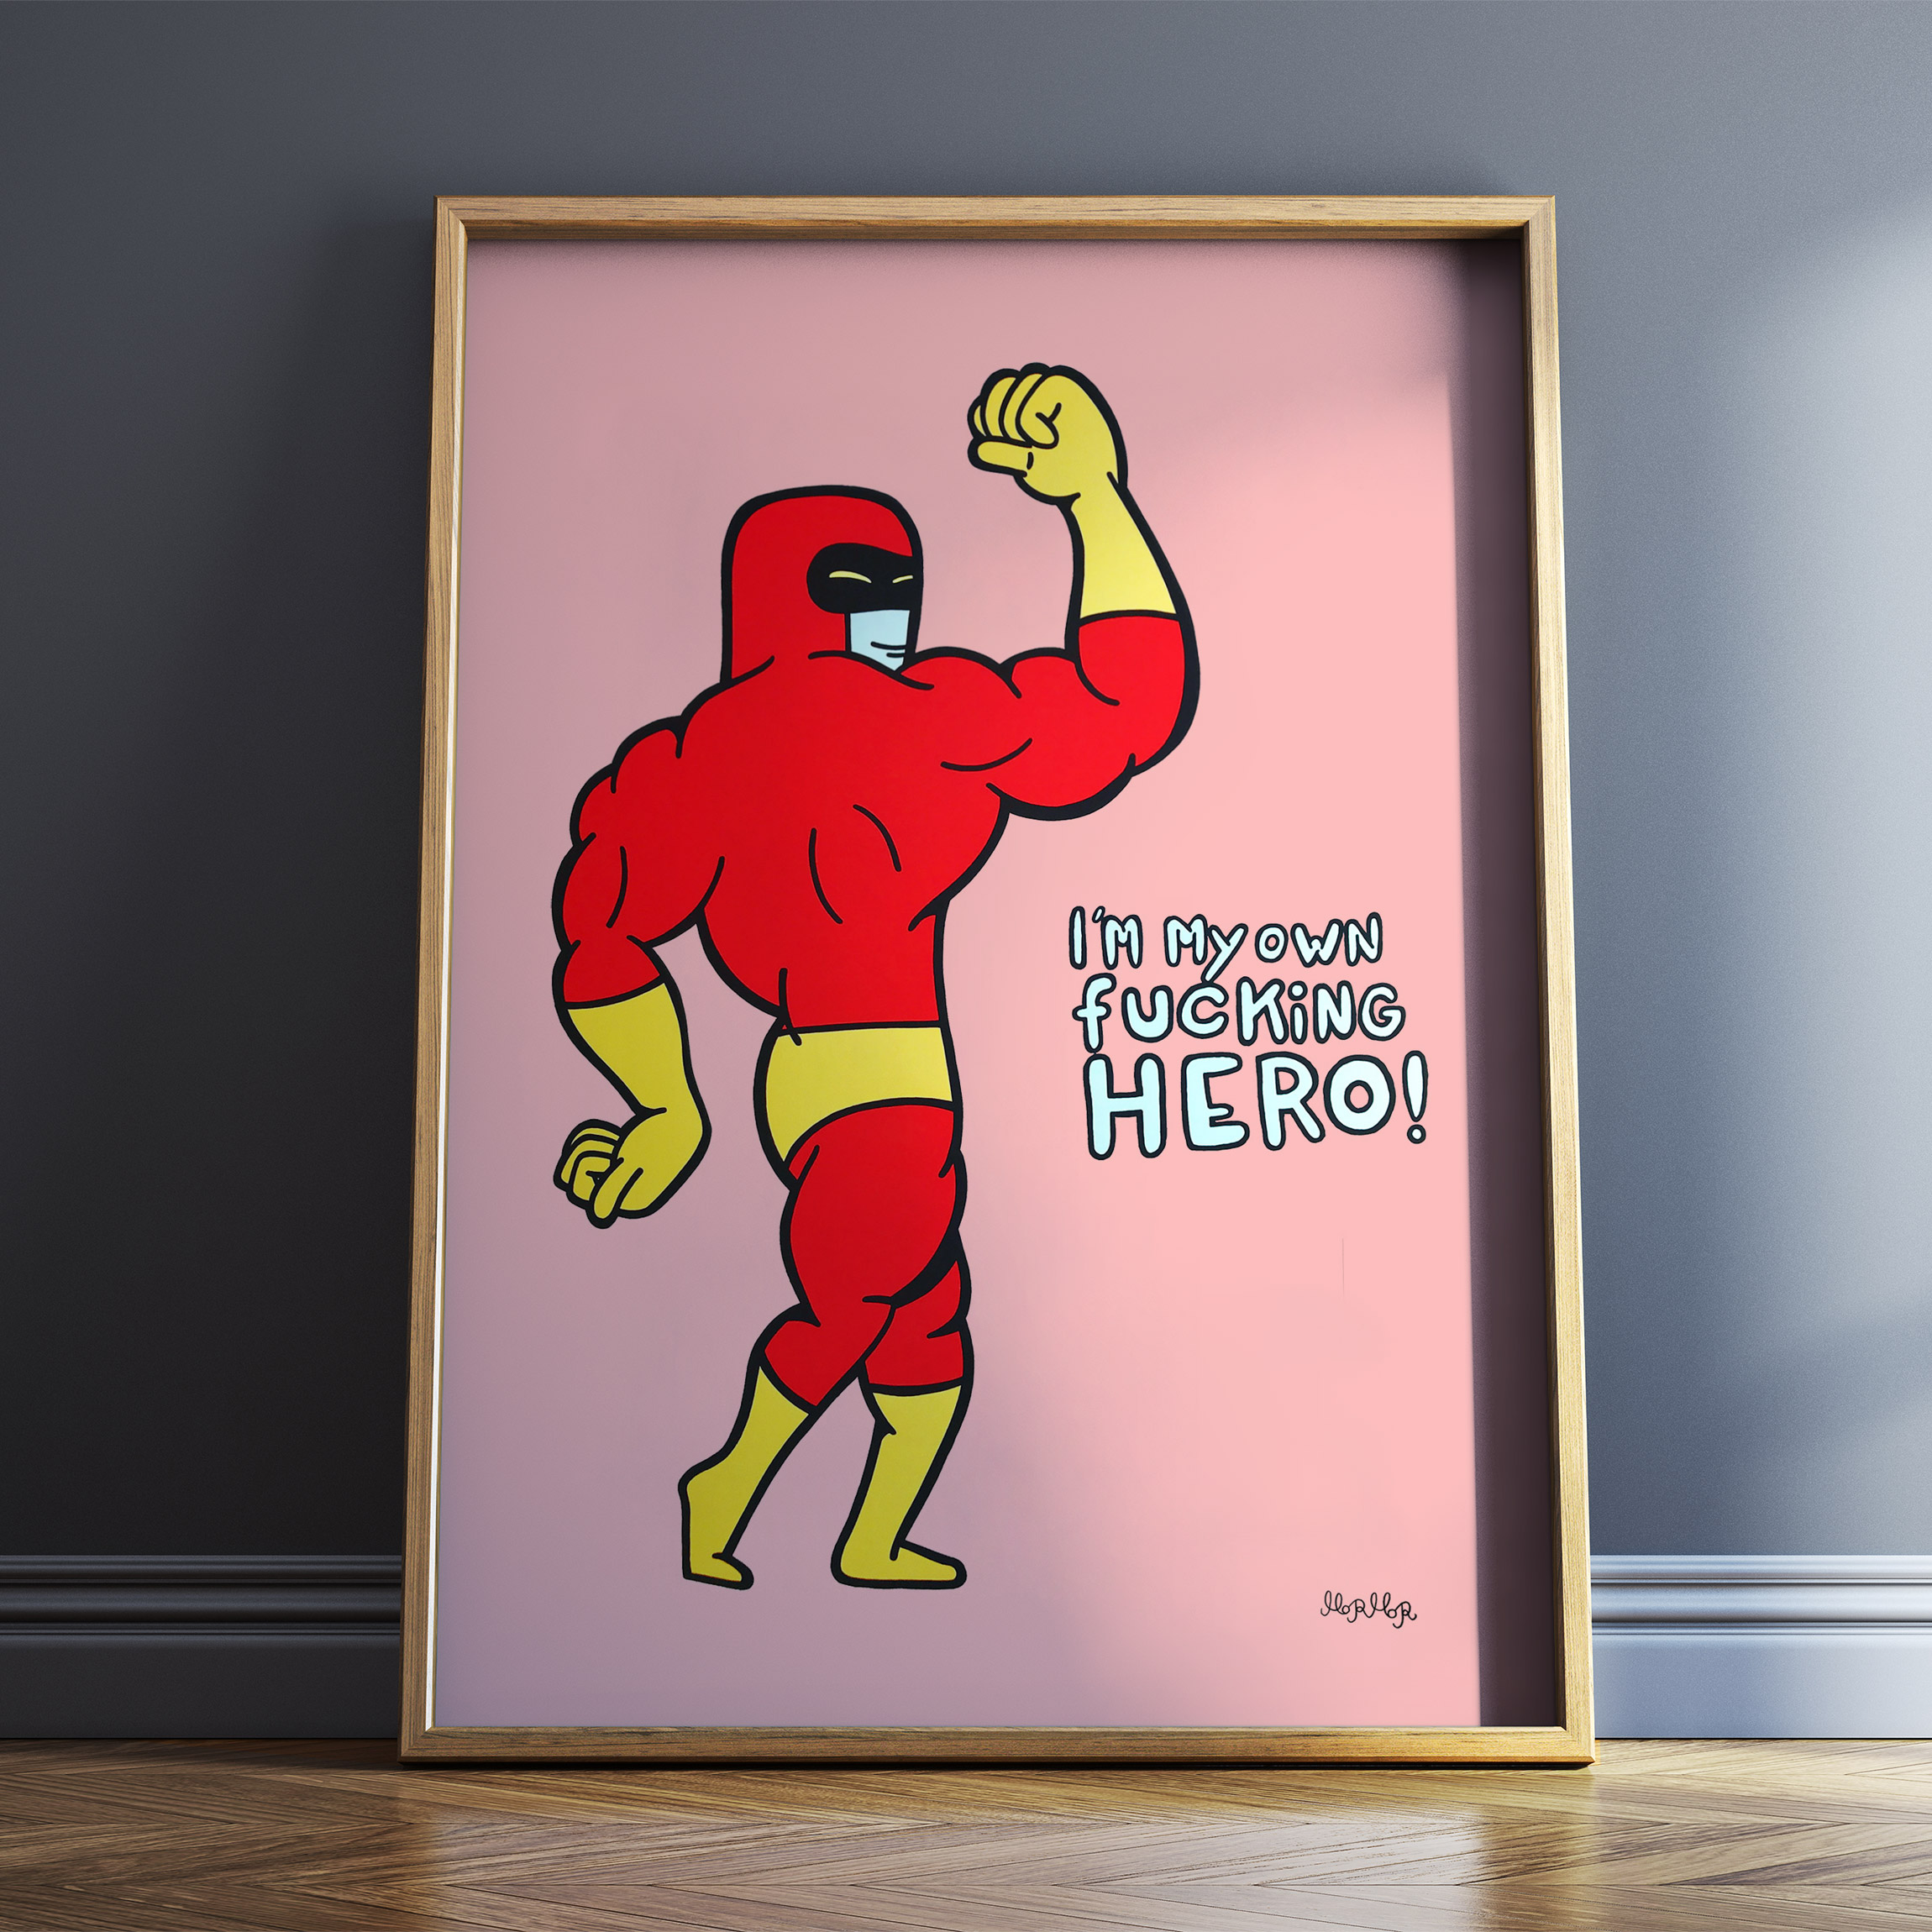 posters-prints, giclee-print, family-friendly, illustrative, pop, bodies, humor, blue, red, ink, amusing, boys, contemporary-art, cute, danish, decorative, design, interior, interior-design, modern, modern-art, nordic, scandinavien, Buy original high quality art. Paintings, drawings, limited edition prints & posters by talented artists.